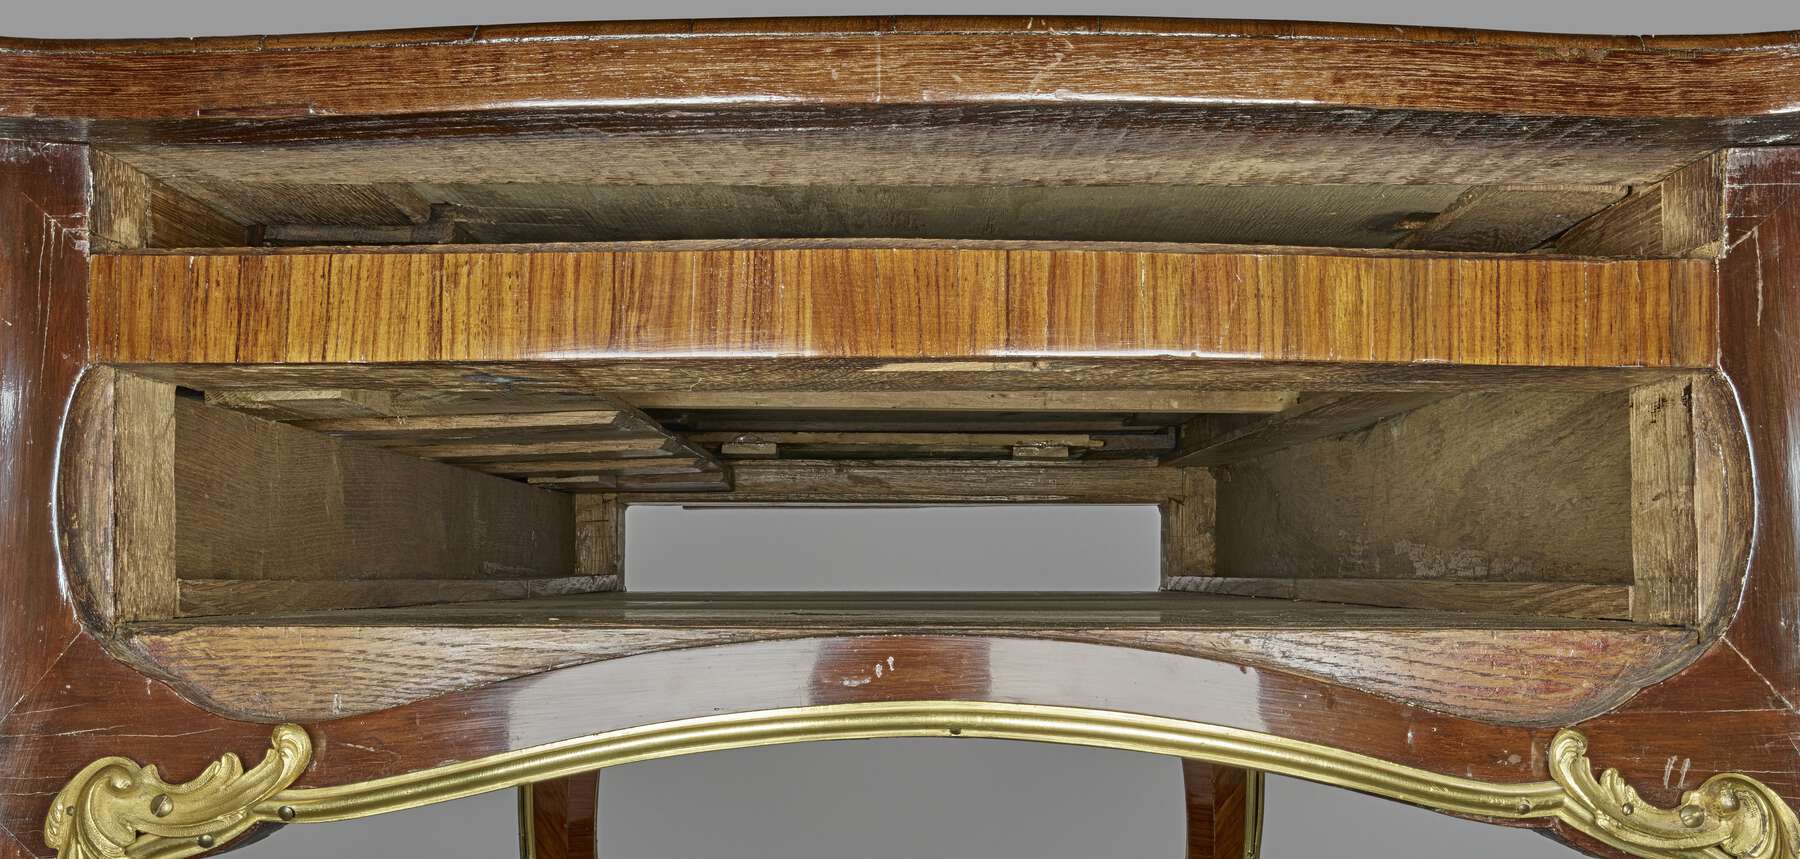 interior view of the table, showing a glossy finished wood on the outside and a rougher unfinished interior made up of multiple wooden strips